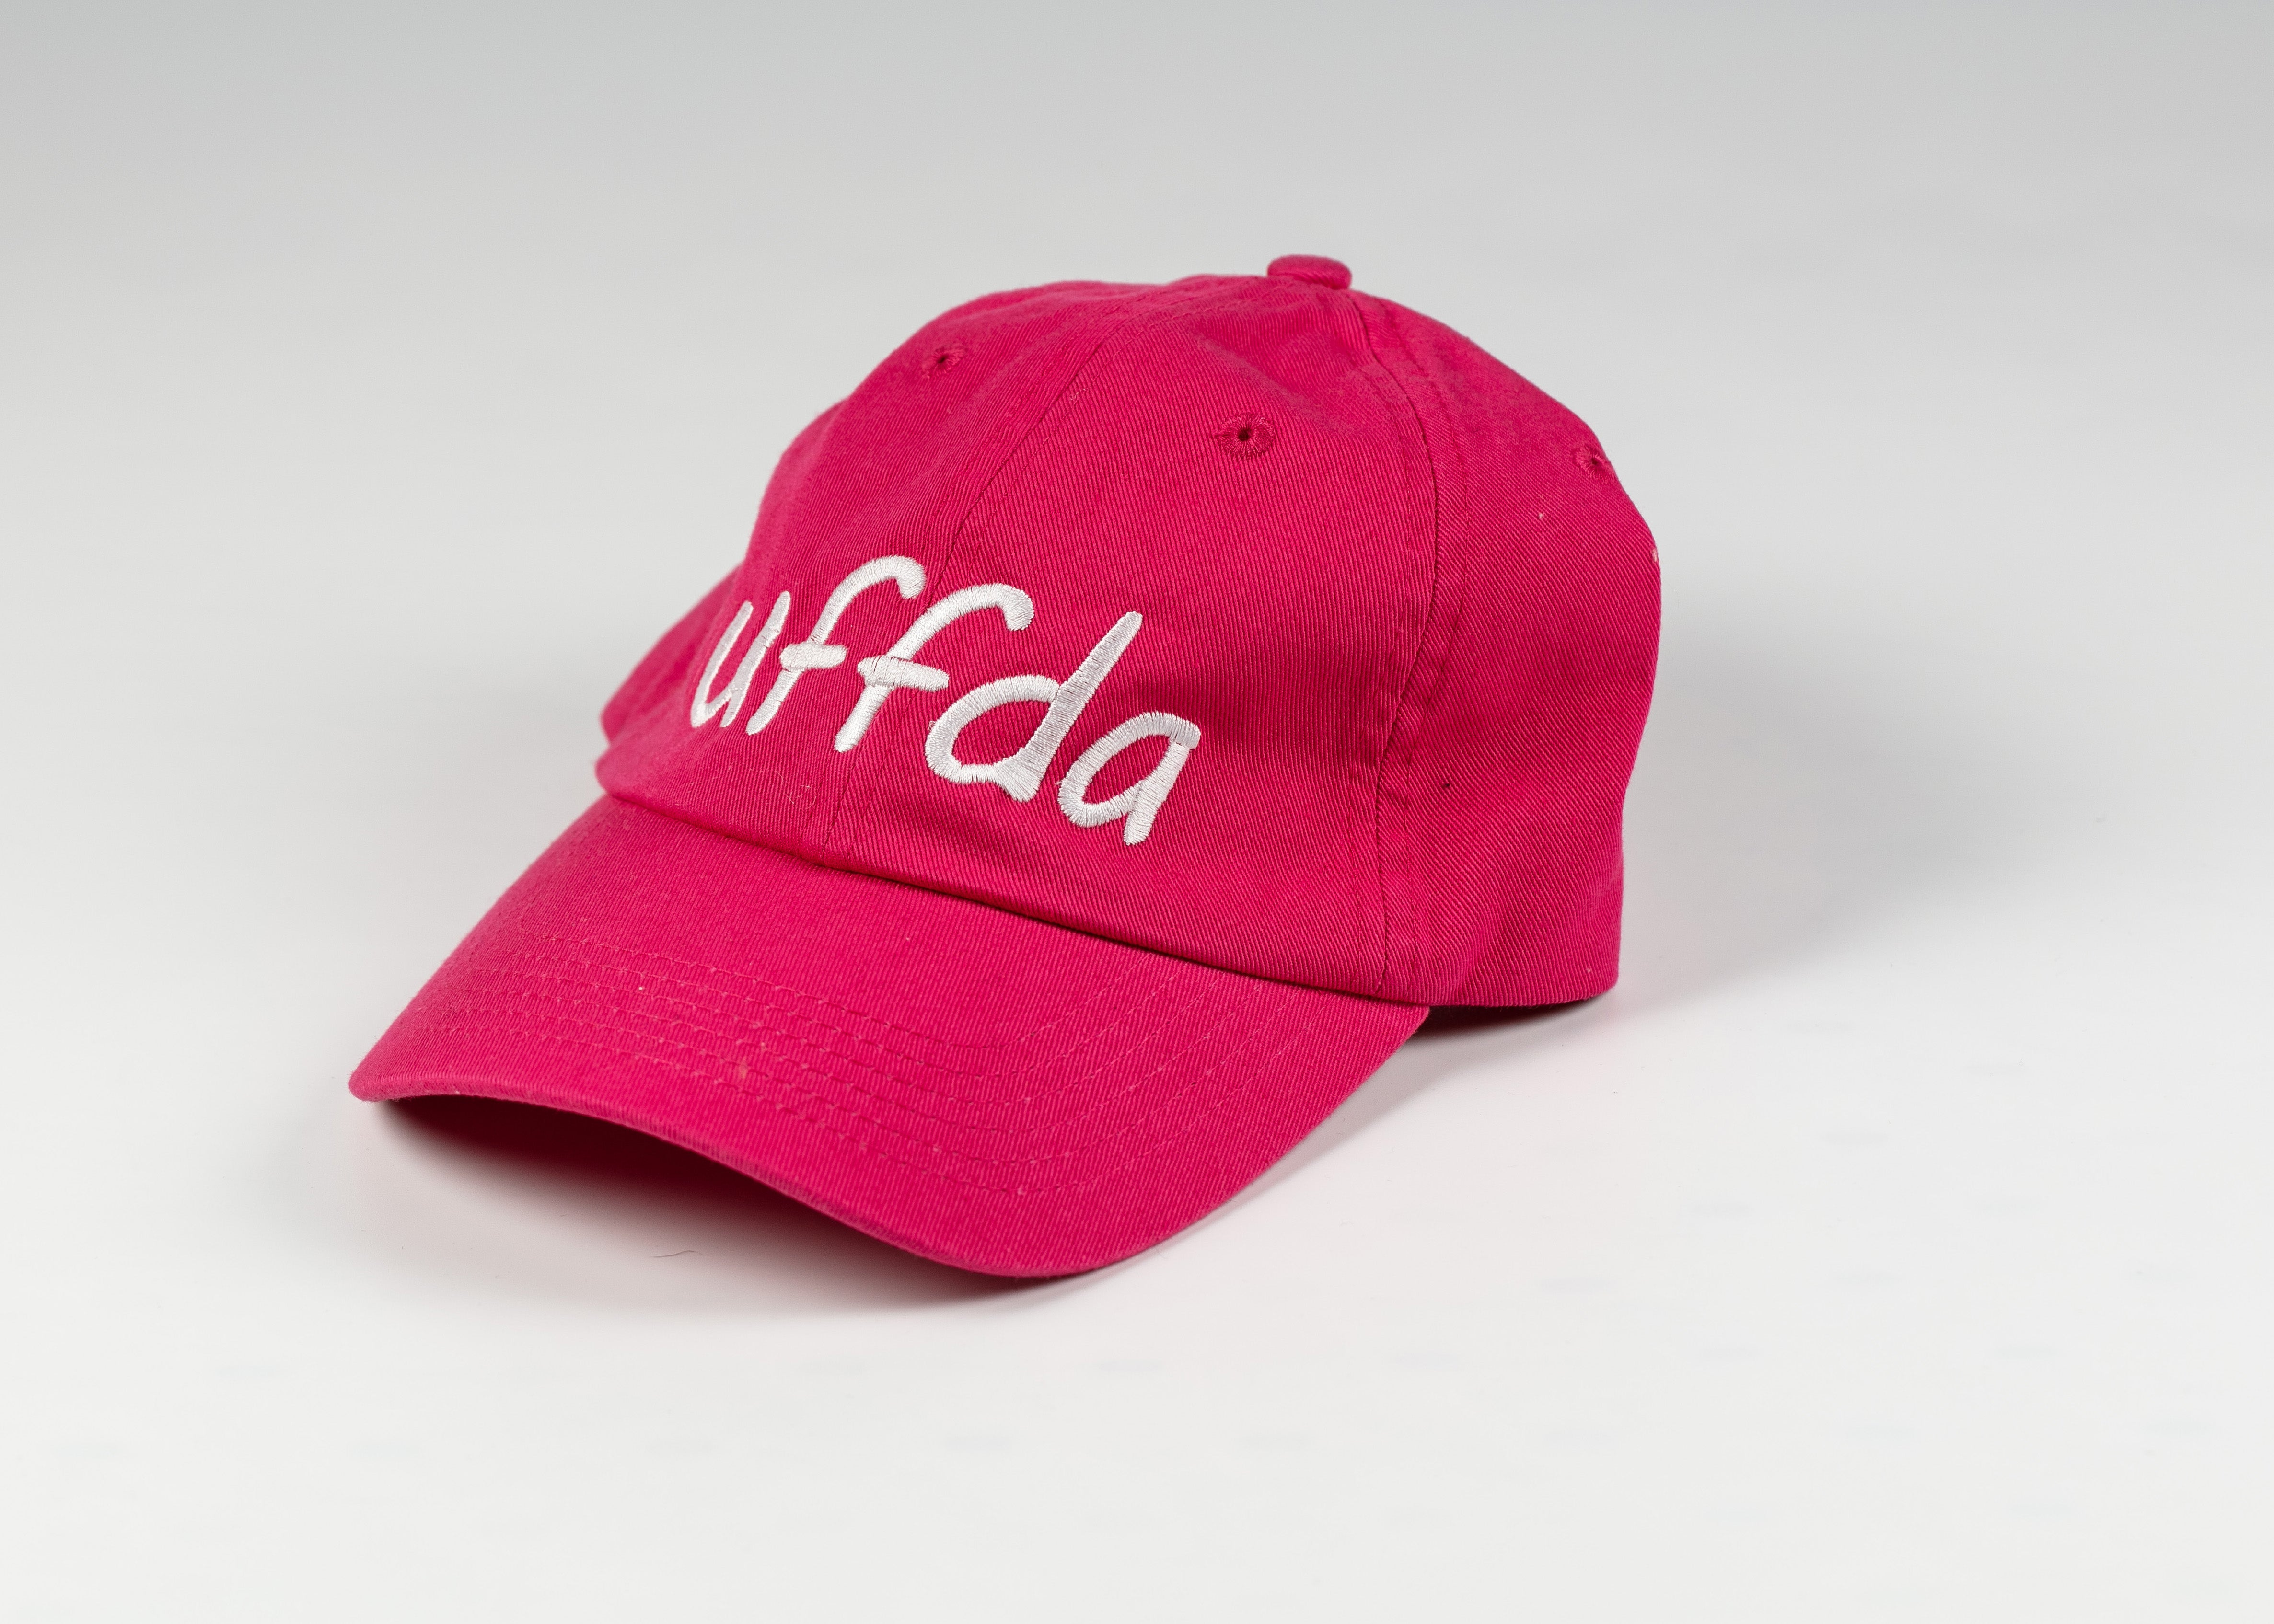 UFFDA EMBROIDERED CAP WITH ADJUSTABLE STRAP